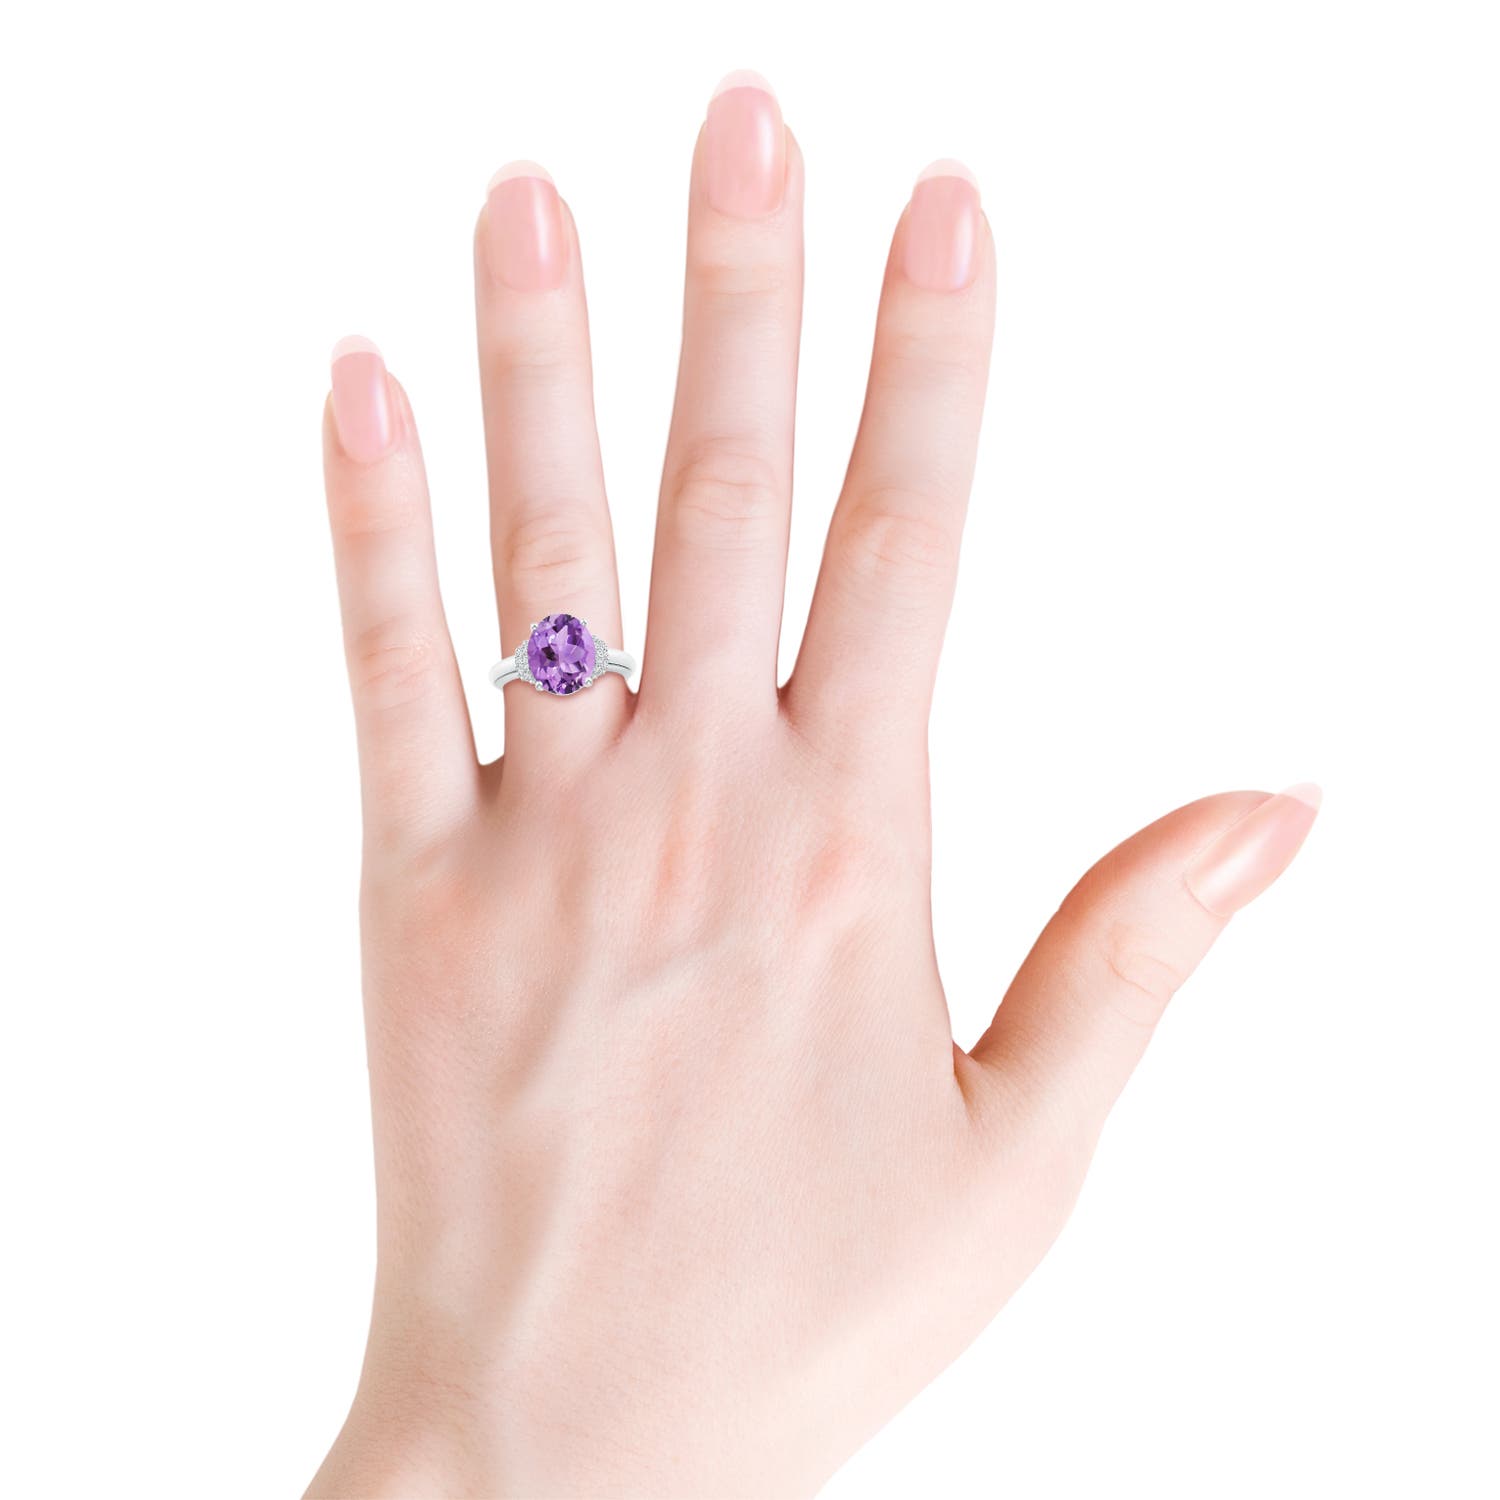 A - Amethyst / 3.35 CT / 14 KT White Gold